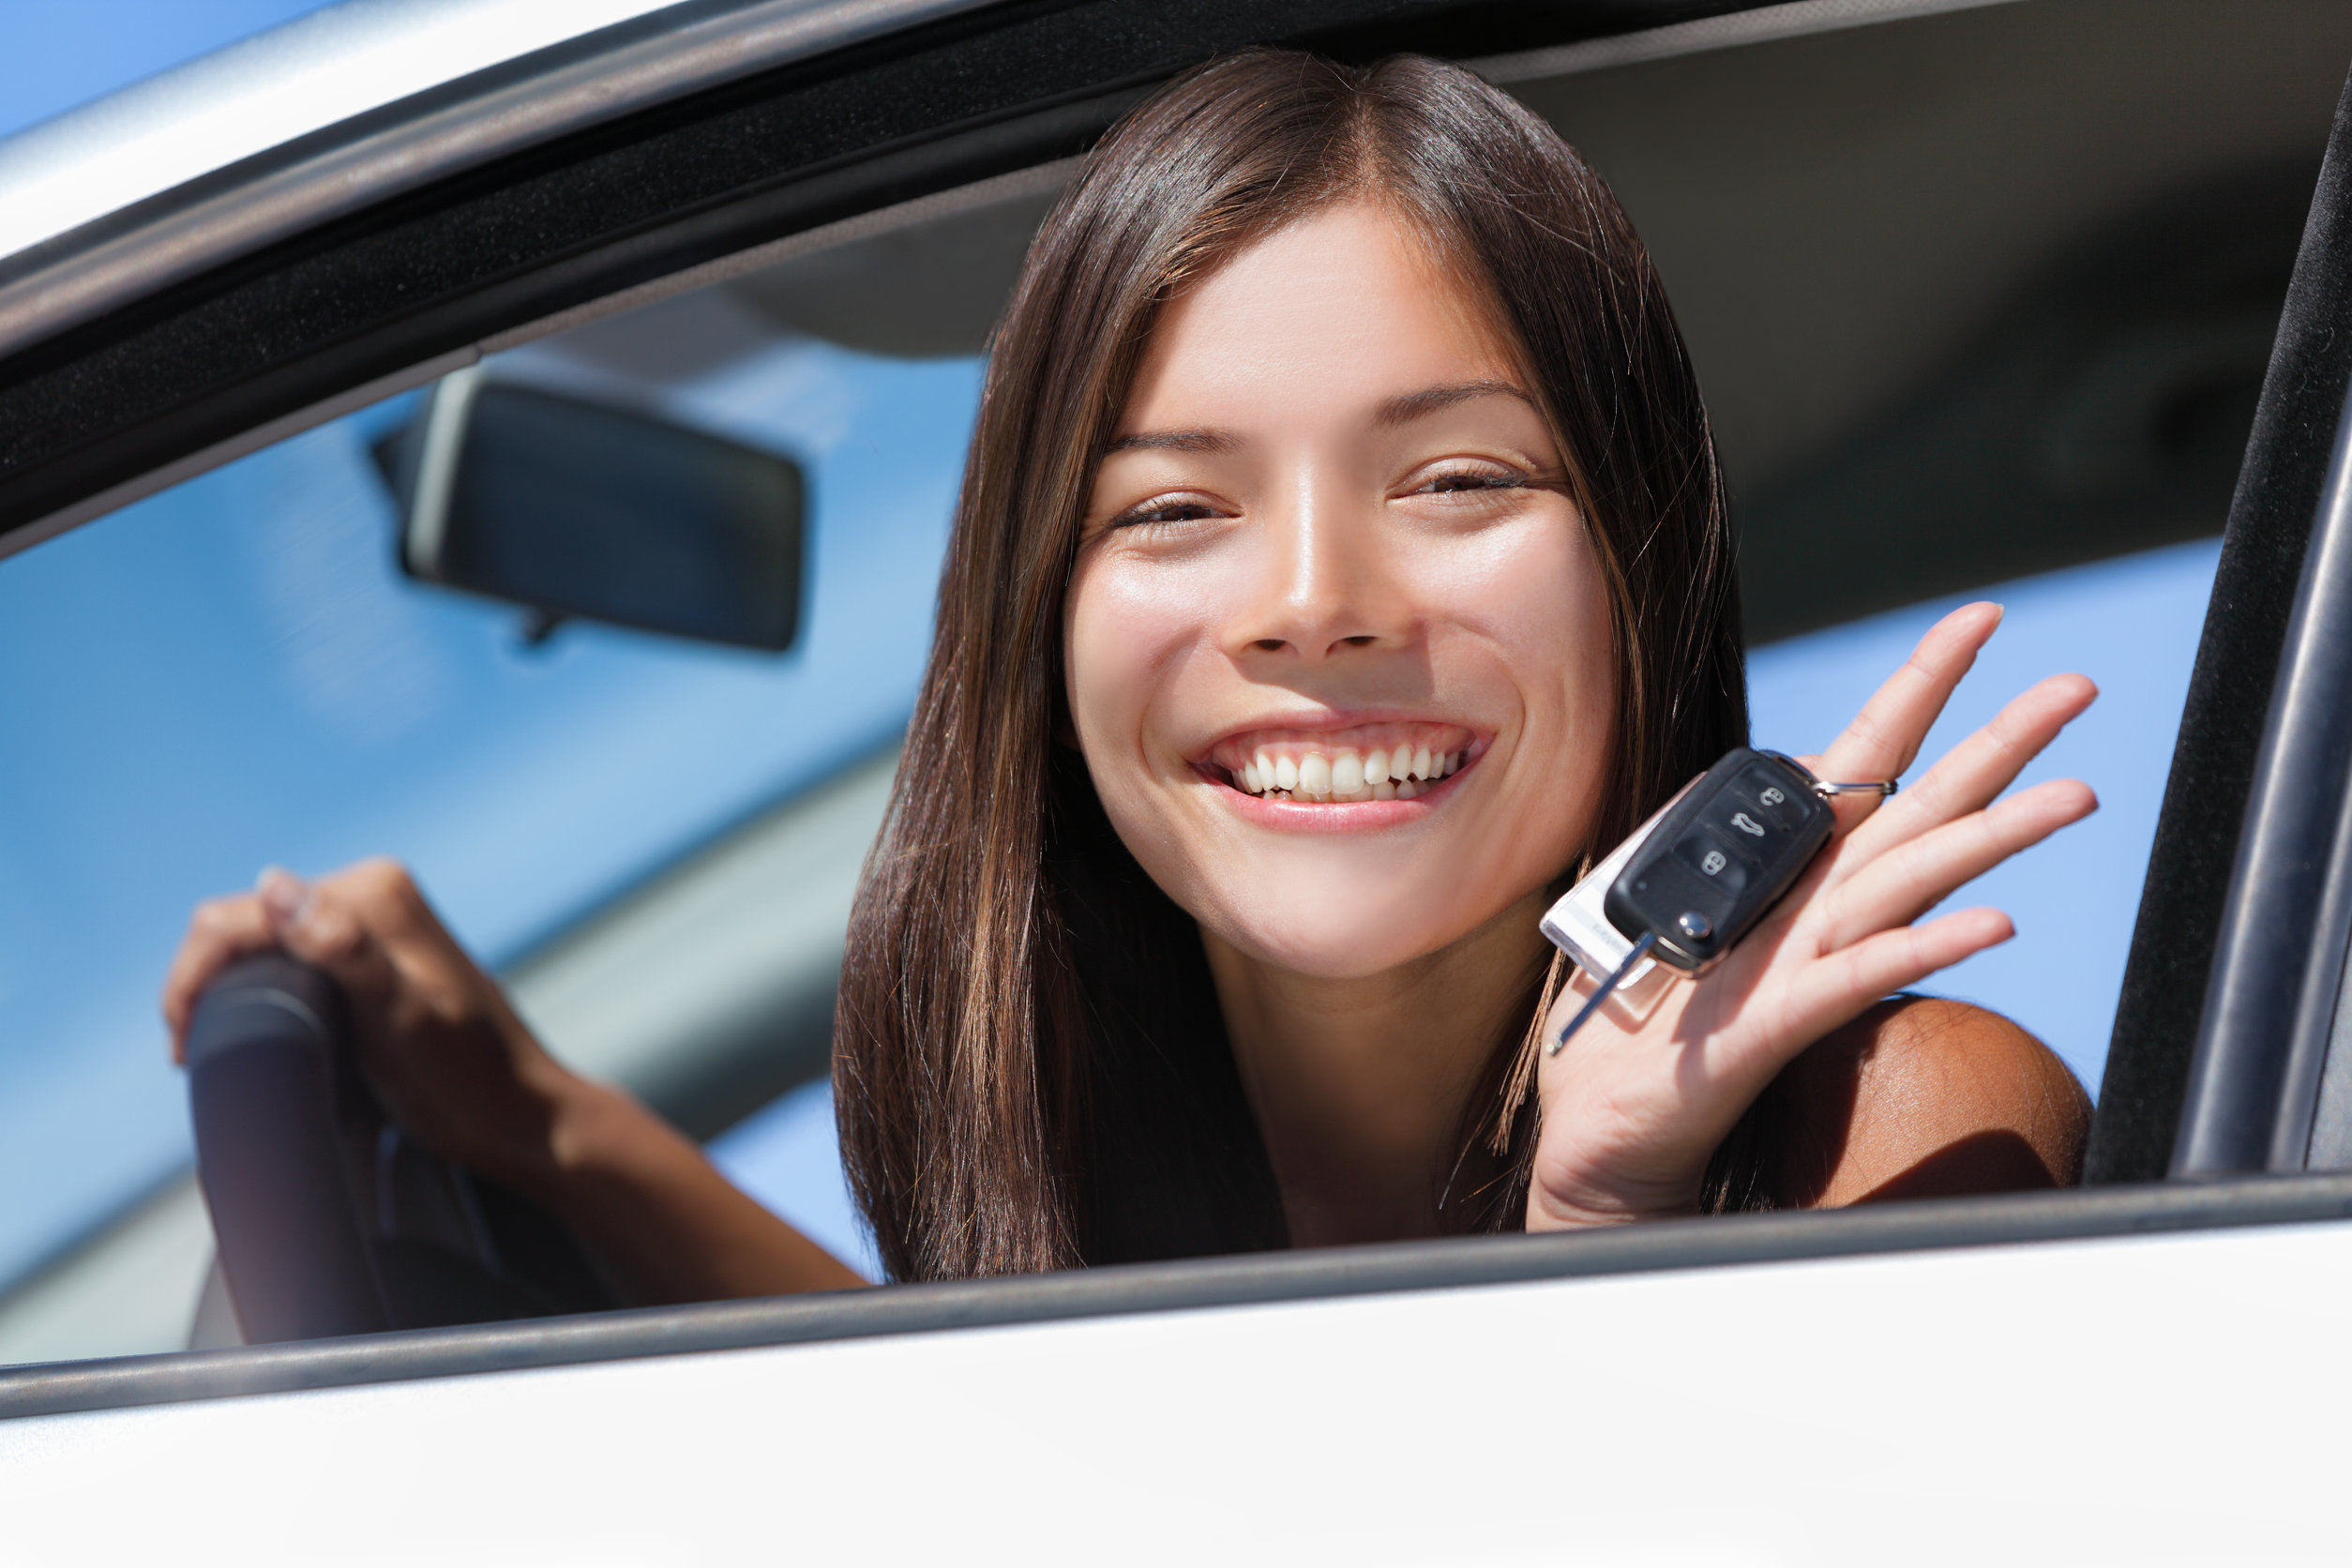 Teaching your Teen to Drive from a Teen’s Perspective